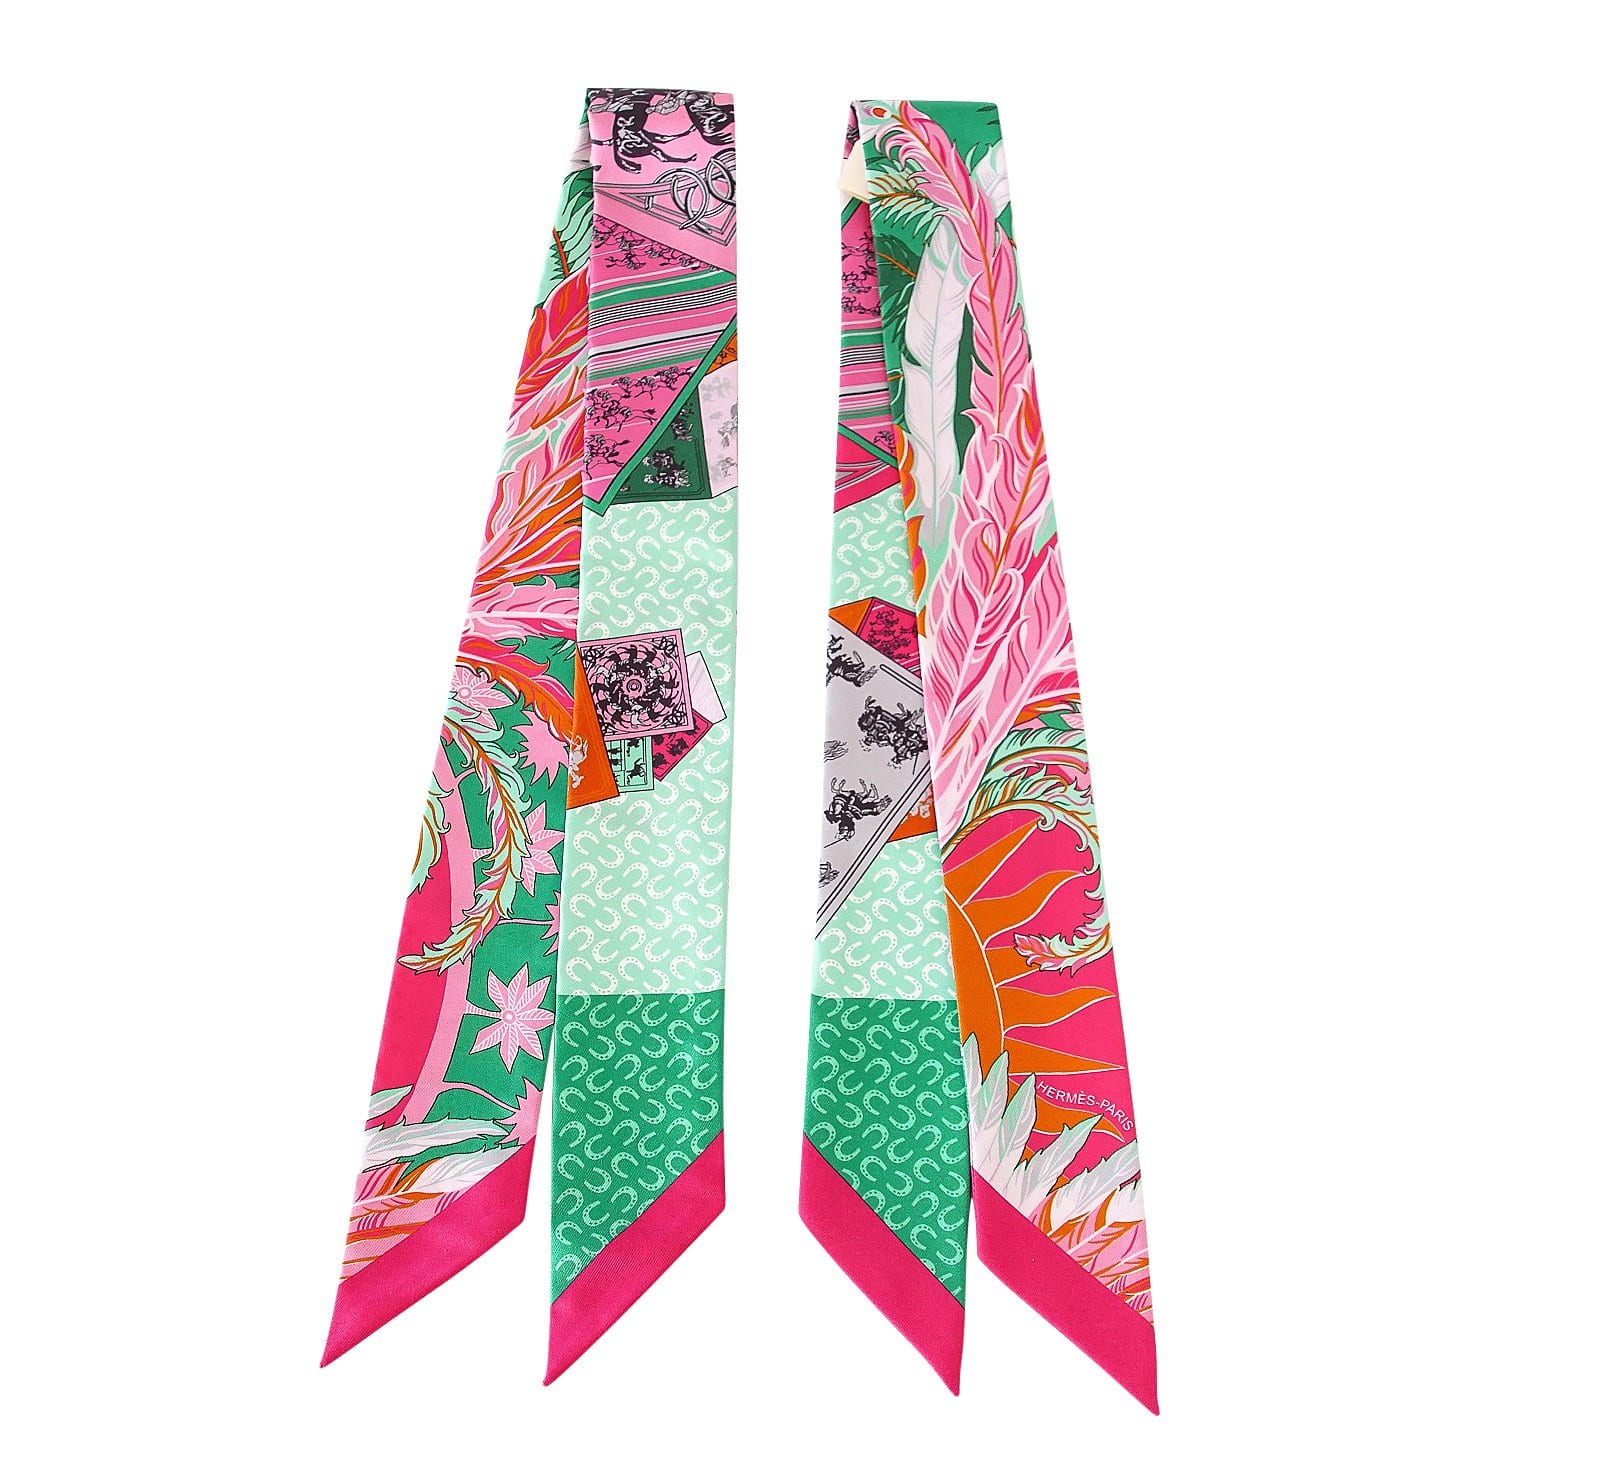 Hermes Twilly Cheval Phoenix Pink Multi Colour Set of 2 Glorious Summer - mightychic